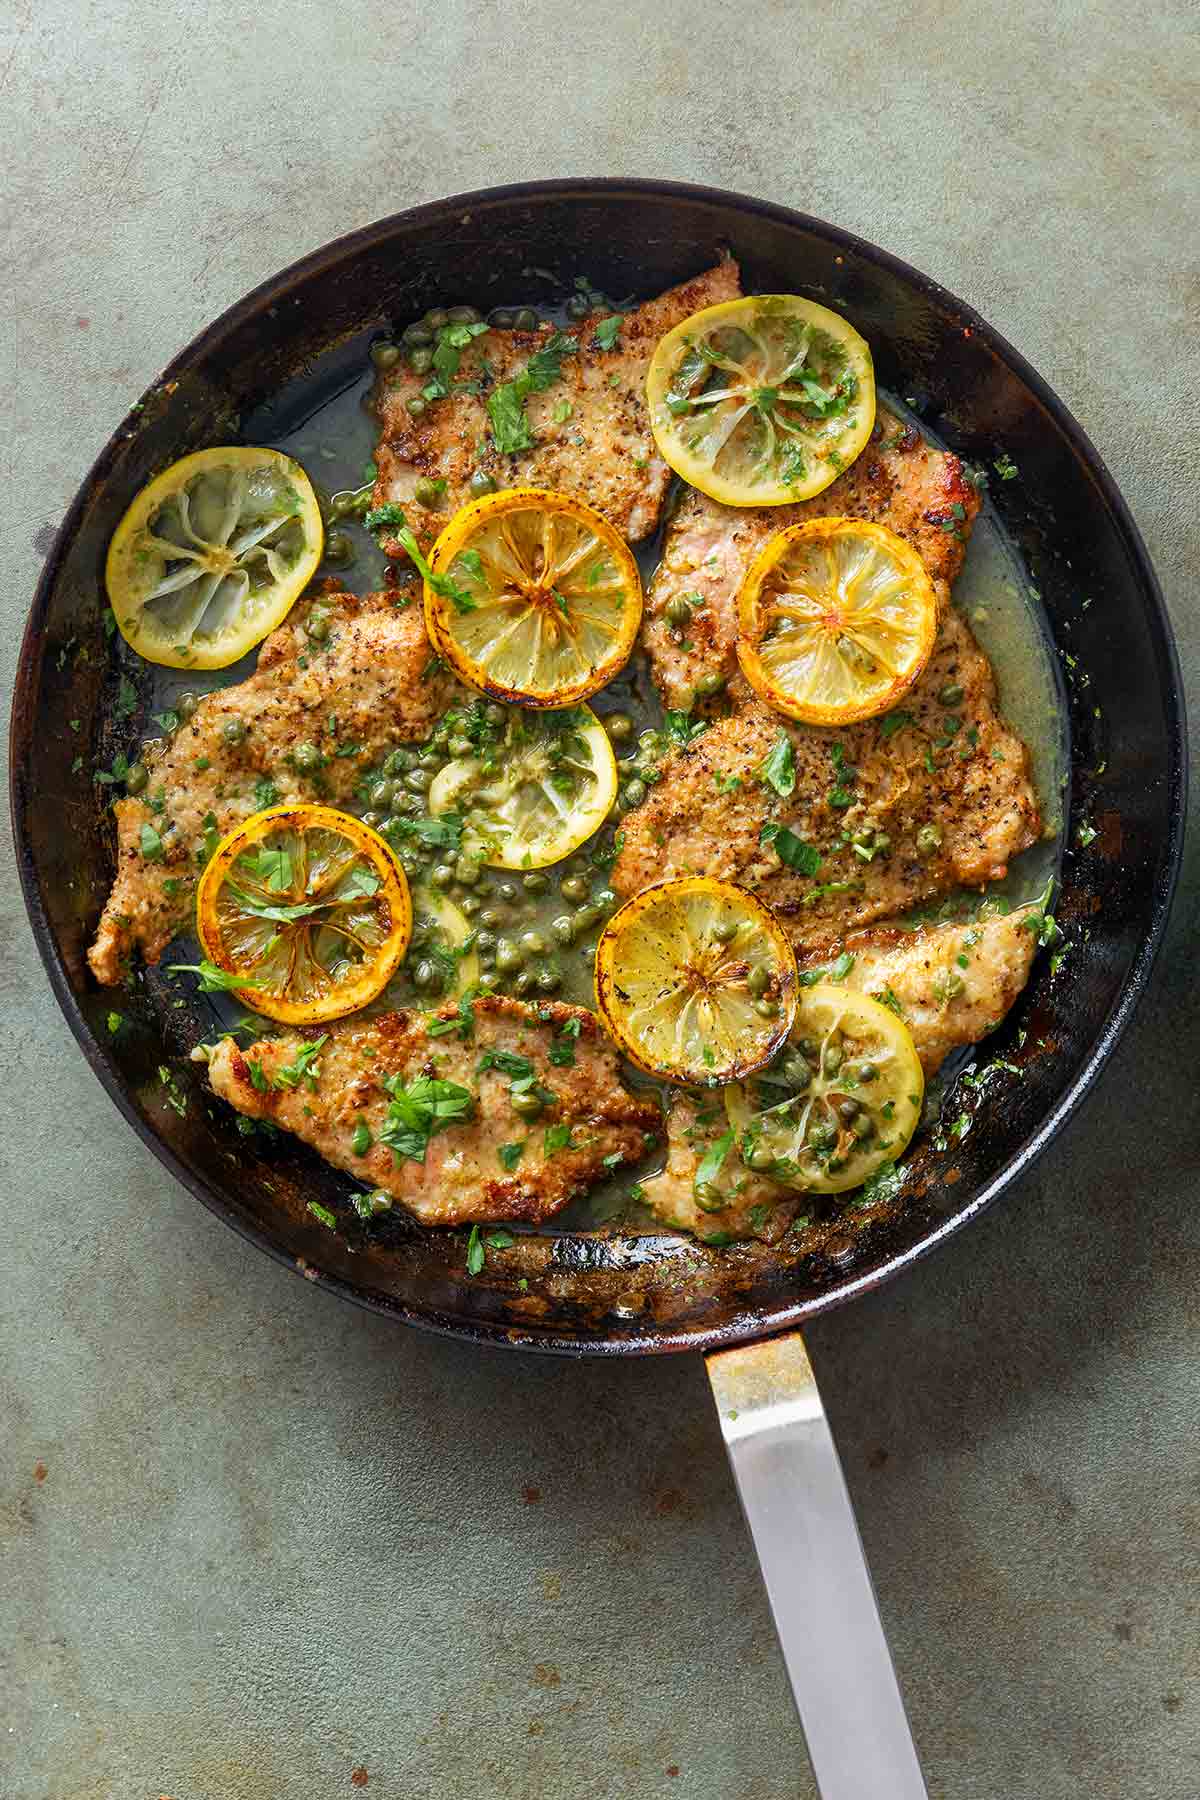 A black skillet of veal piccata--veal cutlets, lemon sauce, sliced lemons, capers, and chopped parsley.